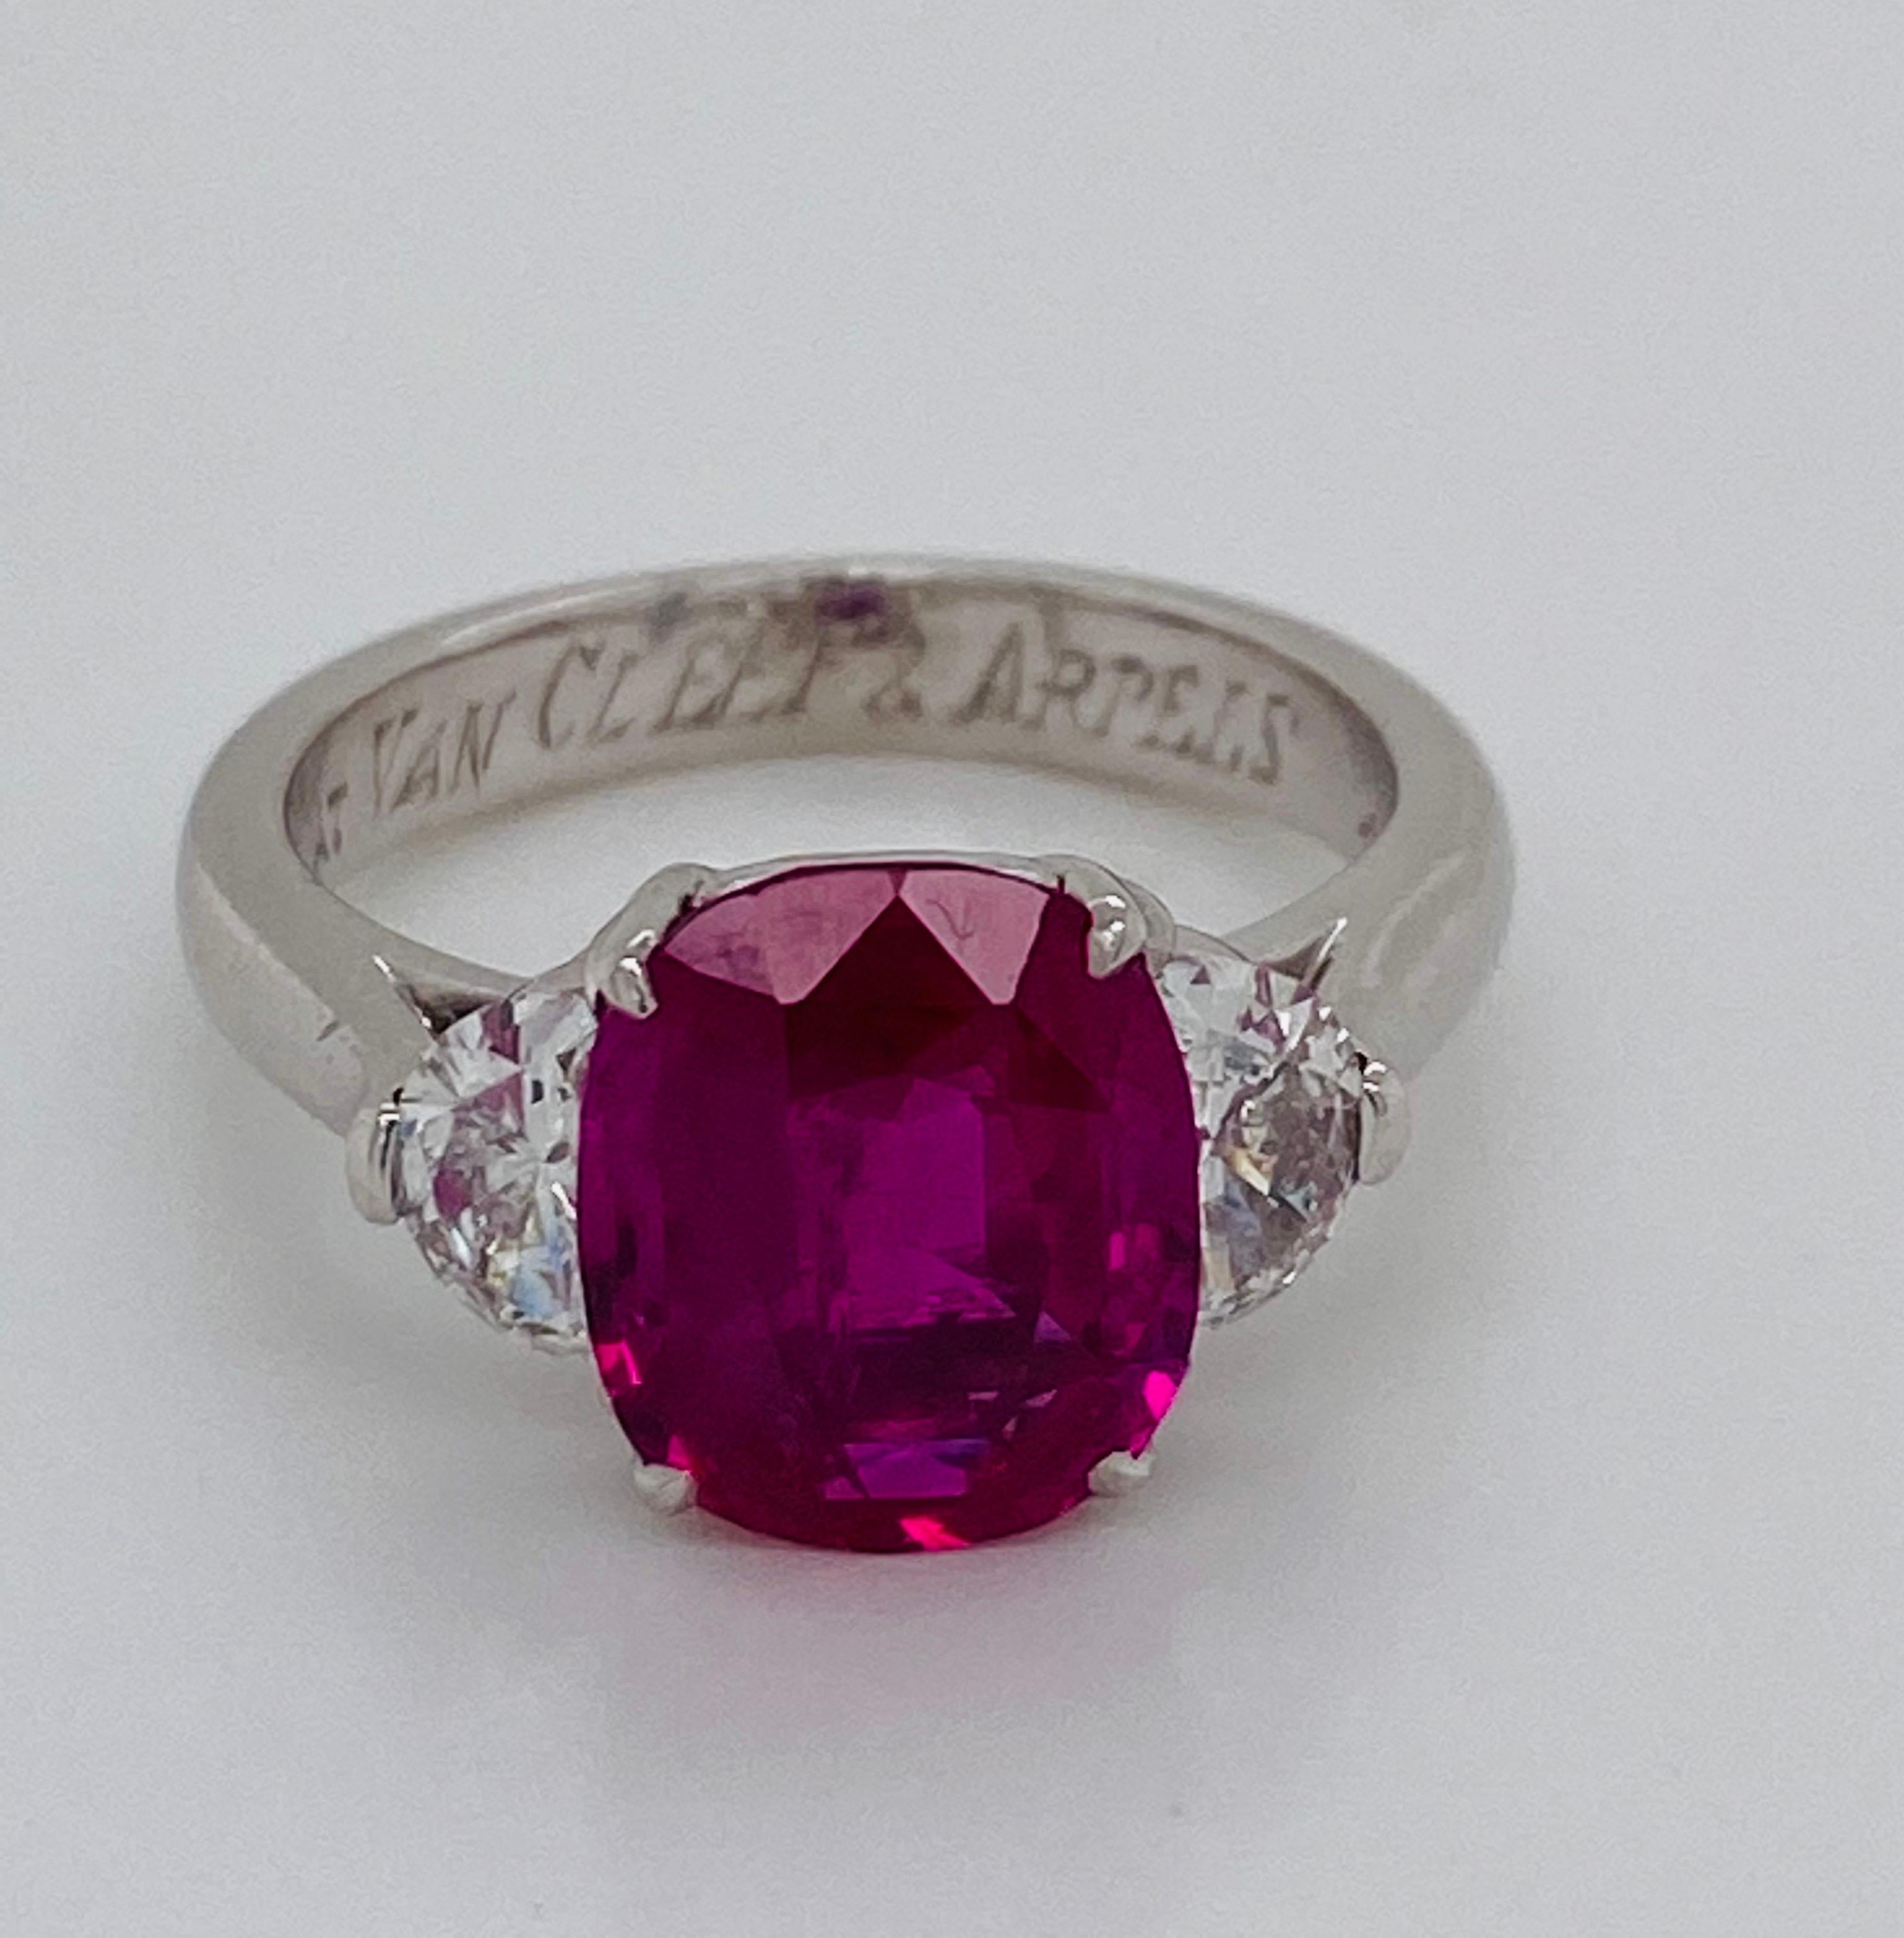 From the vault at Emilio Jewelry, Located On New York’s Iconic Fifth Avenue:
Showcasing a magnificent natural AGL certified Burma no heat ruby weighing 3.16 carats, Set in a Platinum signed Van Cleef and arpels mounting. Burmese rubies are the